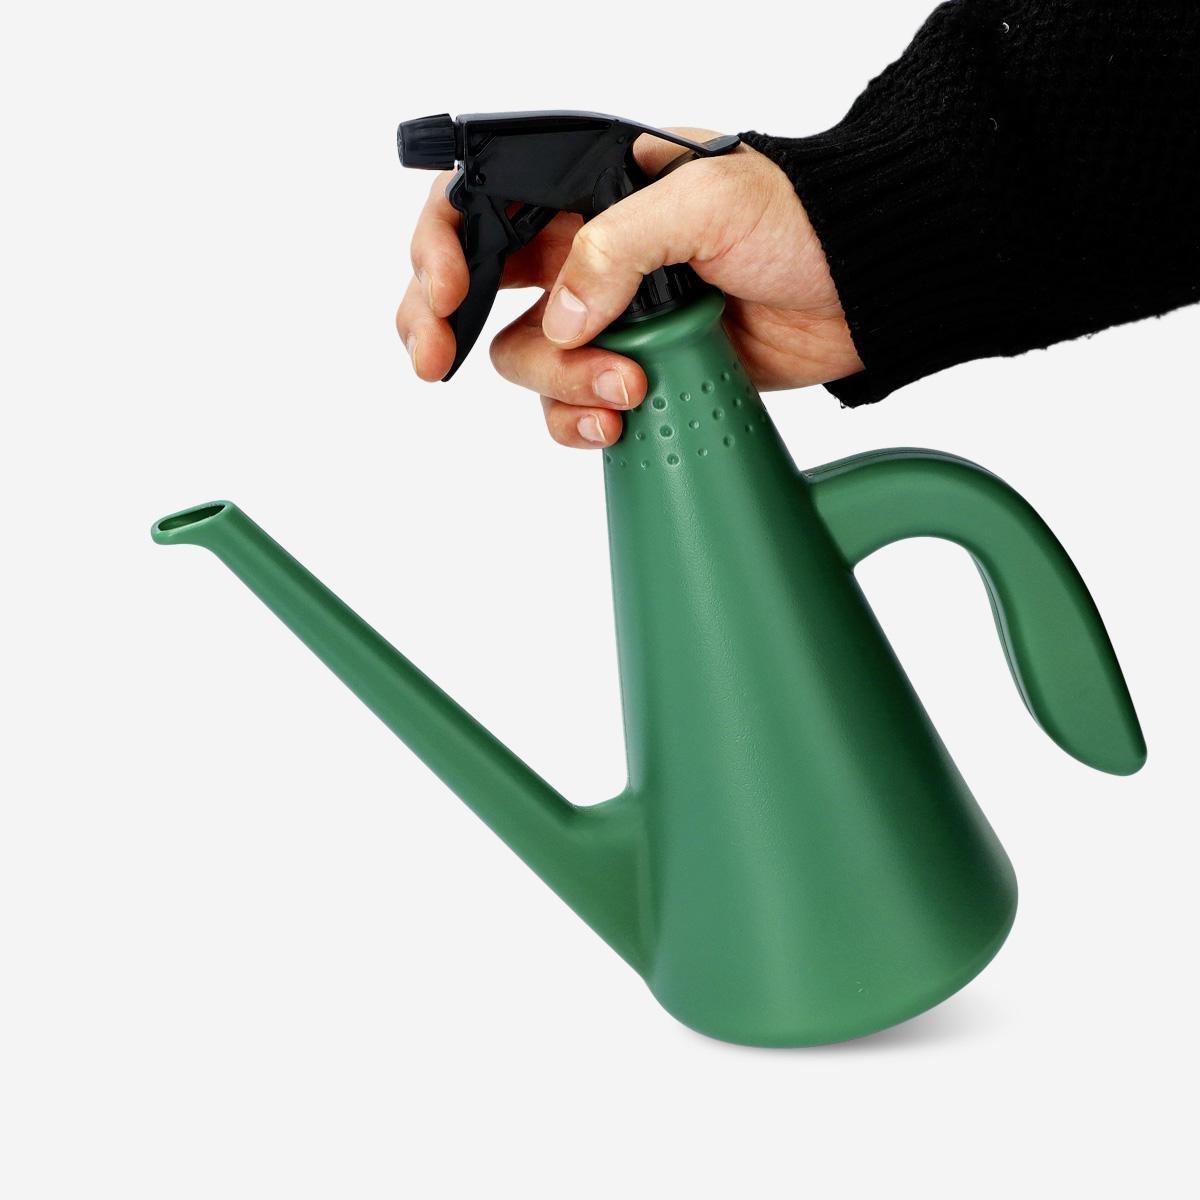 Green watering can. with mist spray